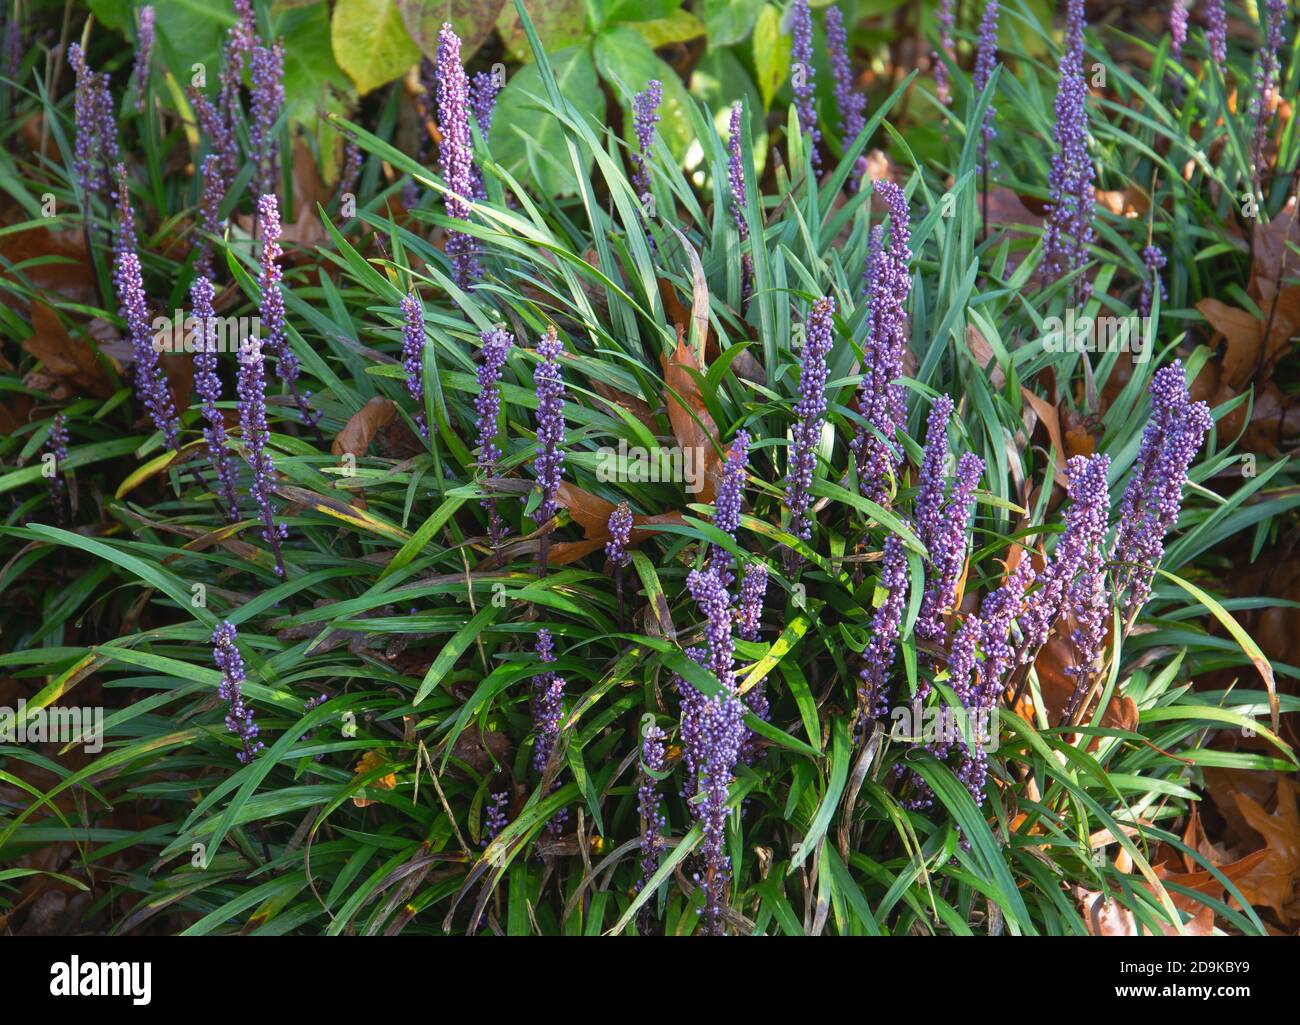 Liriope muscari, big blue lilyturf, a small herbaceous perennial with grass like evergreen foliage and lilac purple flowers Stock Photo